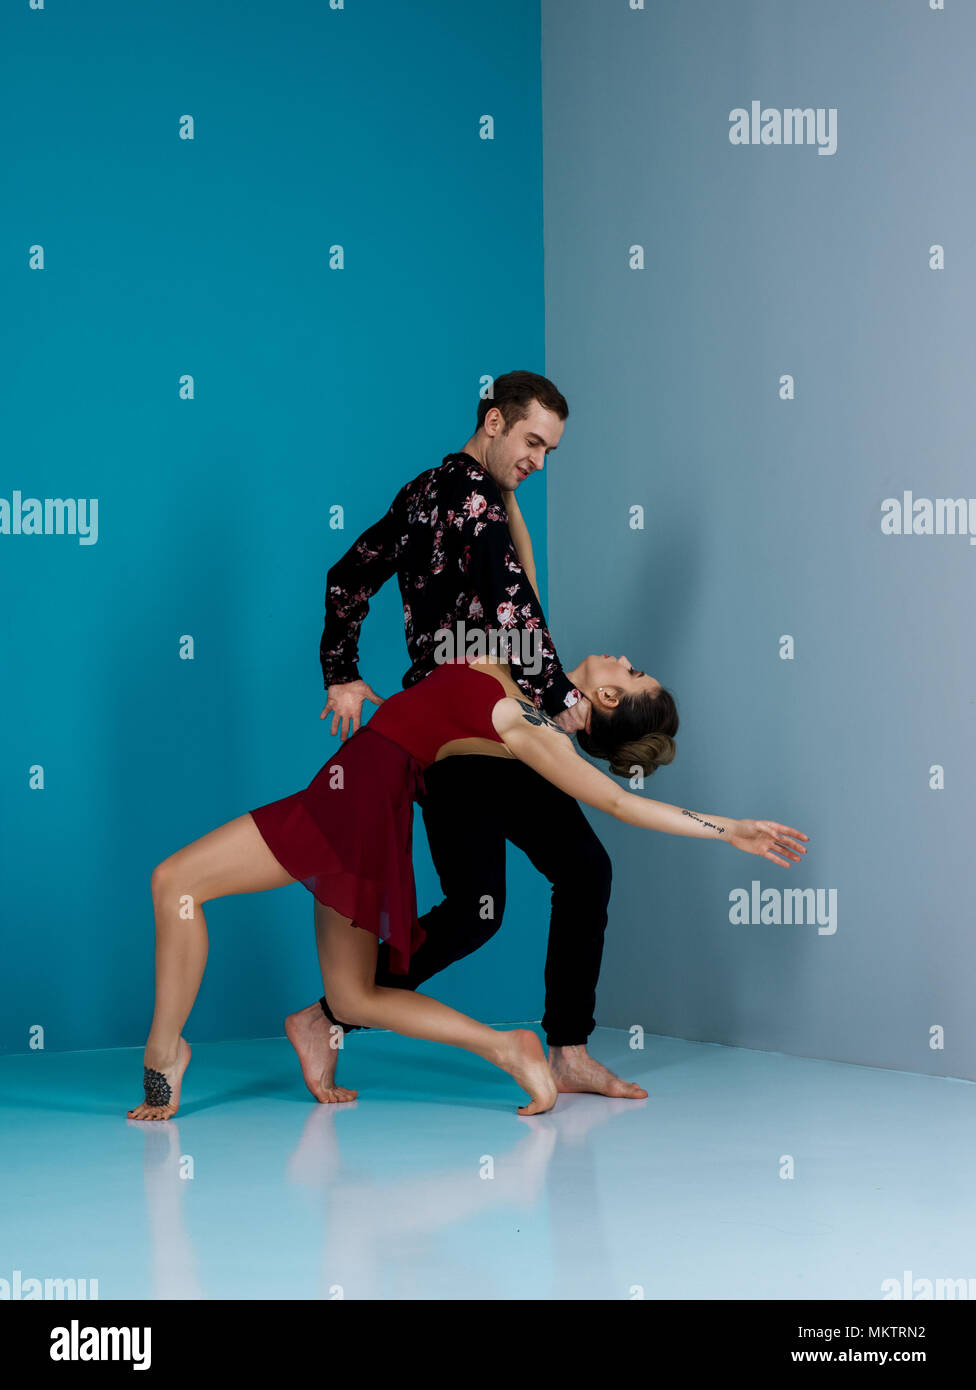 Modern ballet dancer couple in black trousers black in roses shirt and bordo dress performing art dance element with space background Stock Photo